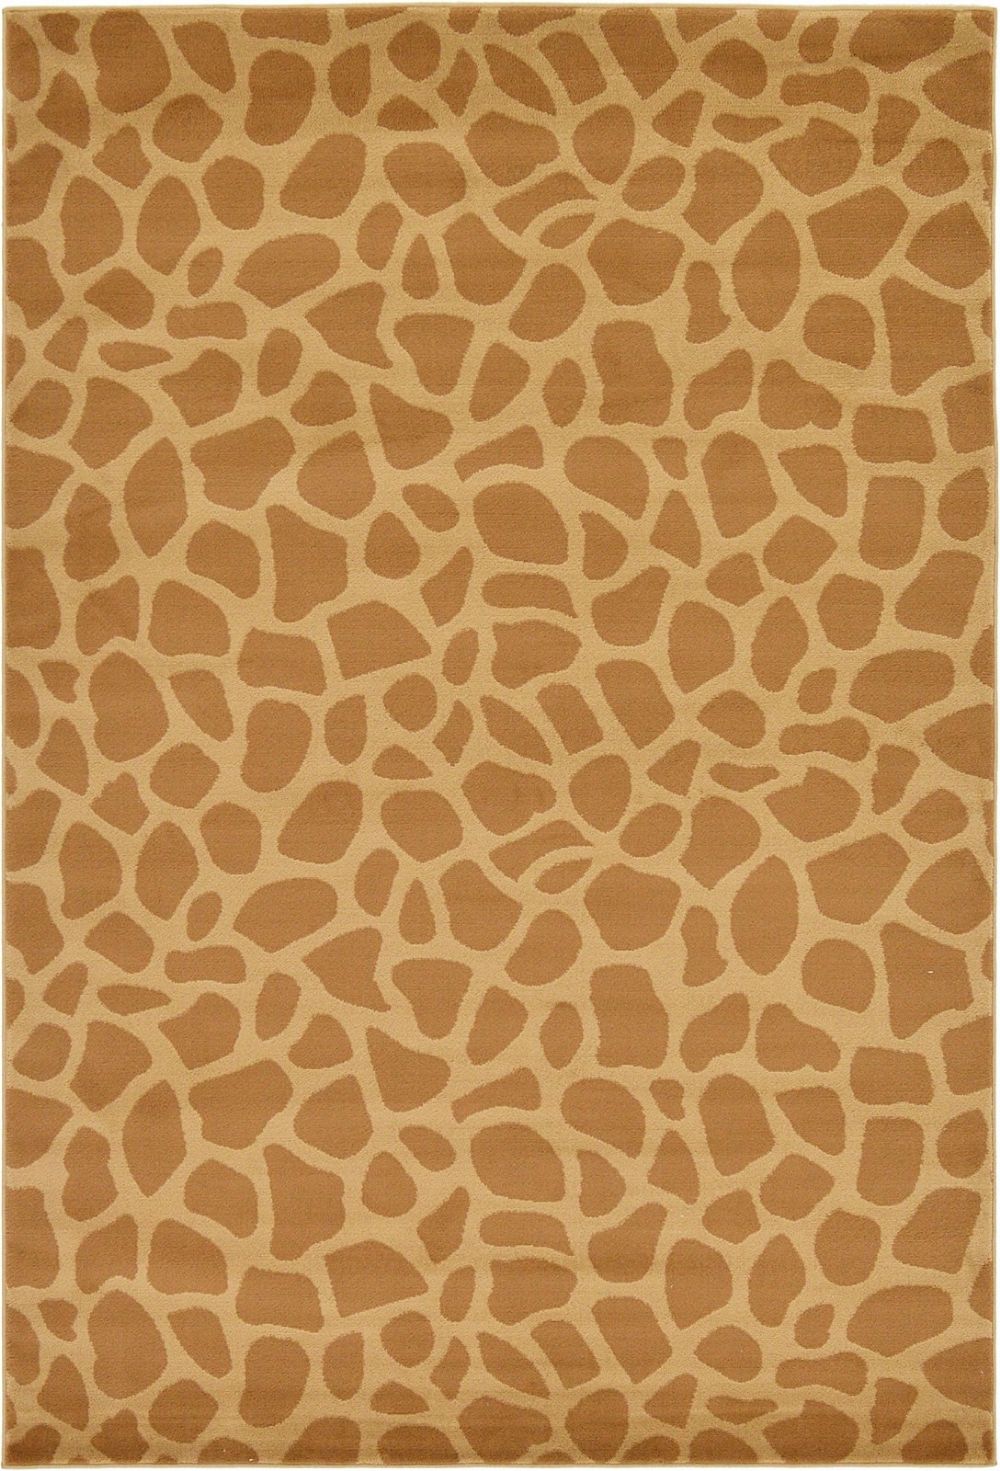 rugpal wild animal inspirations area rug collection